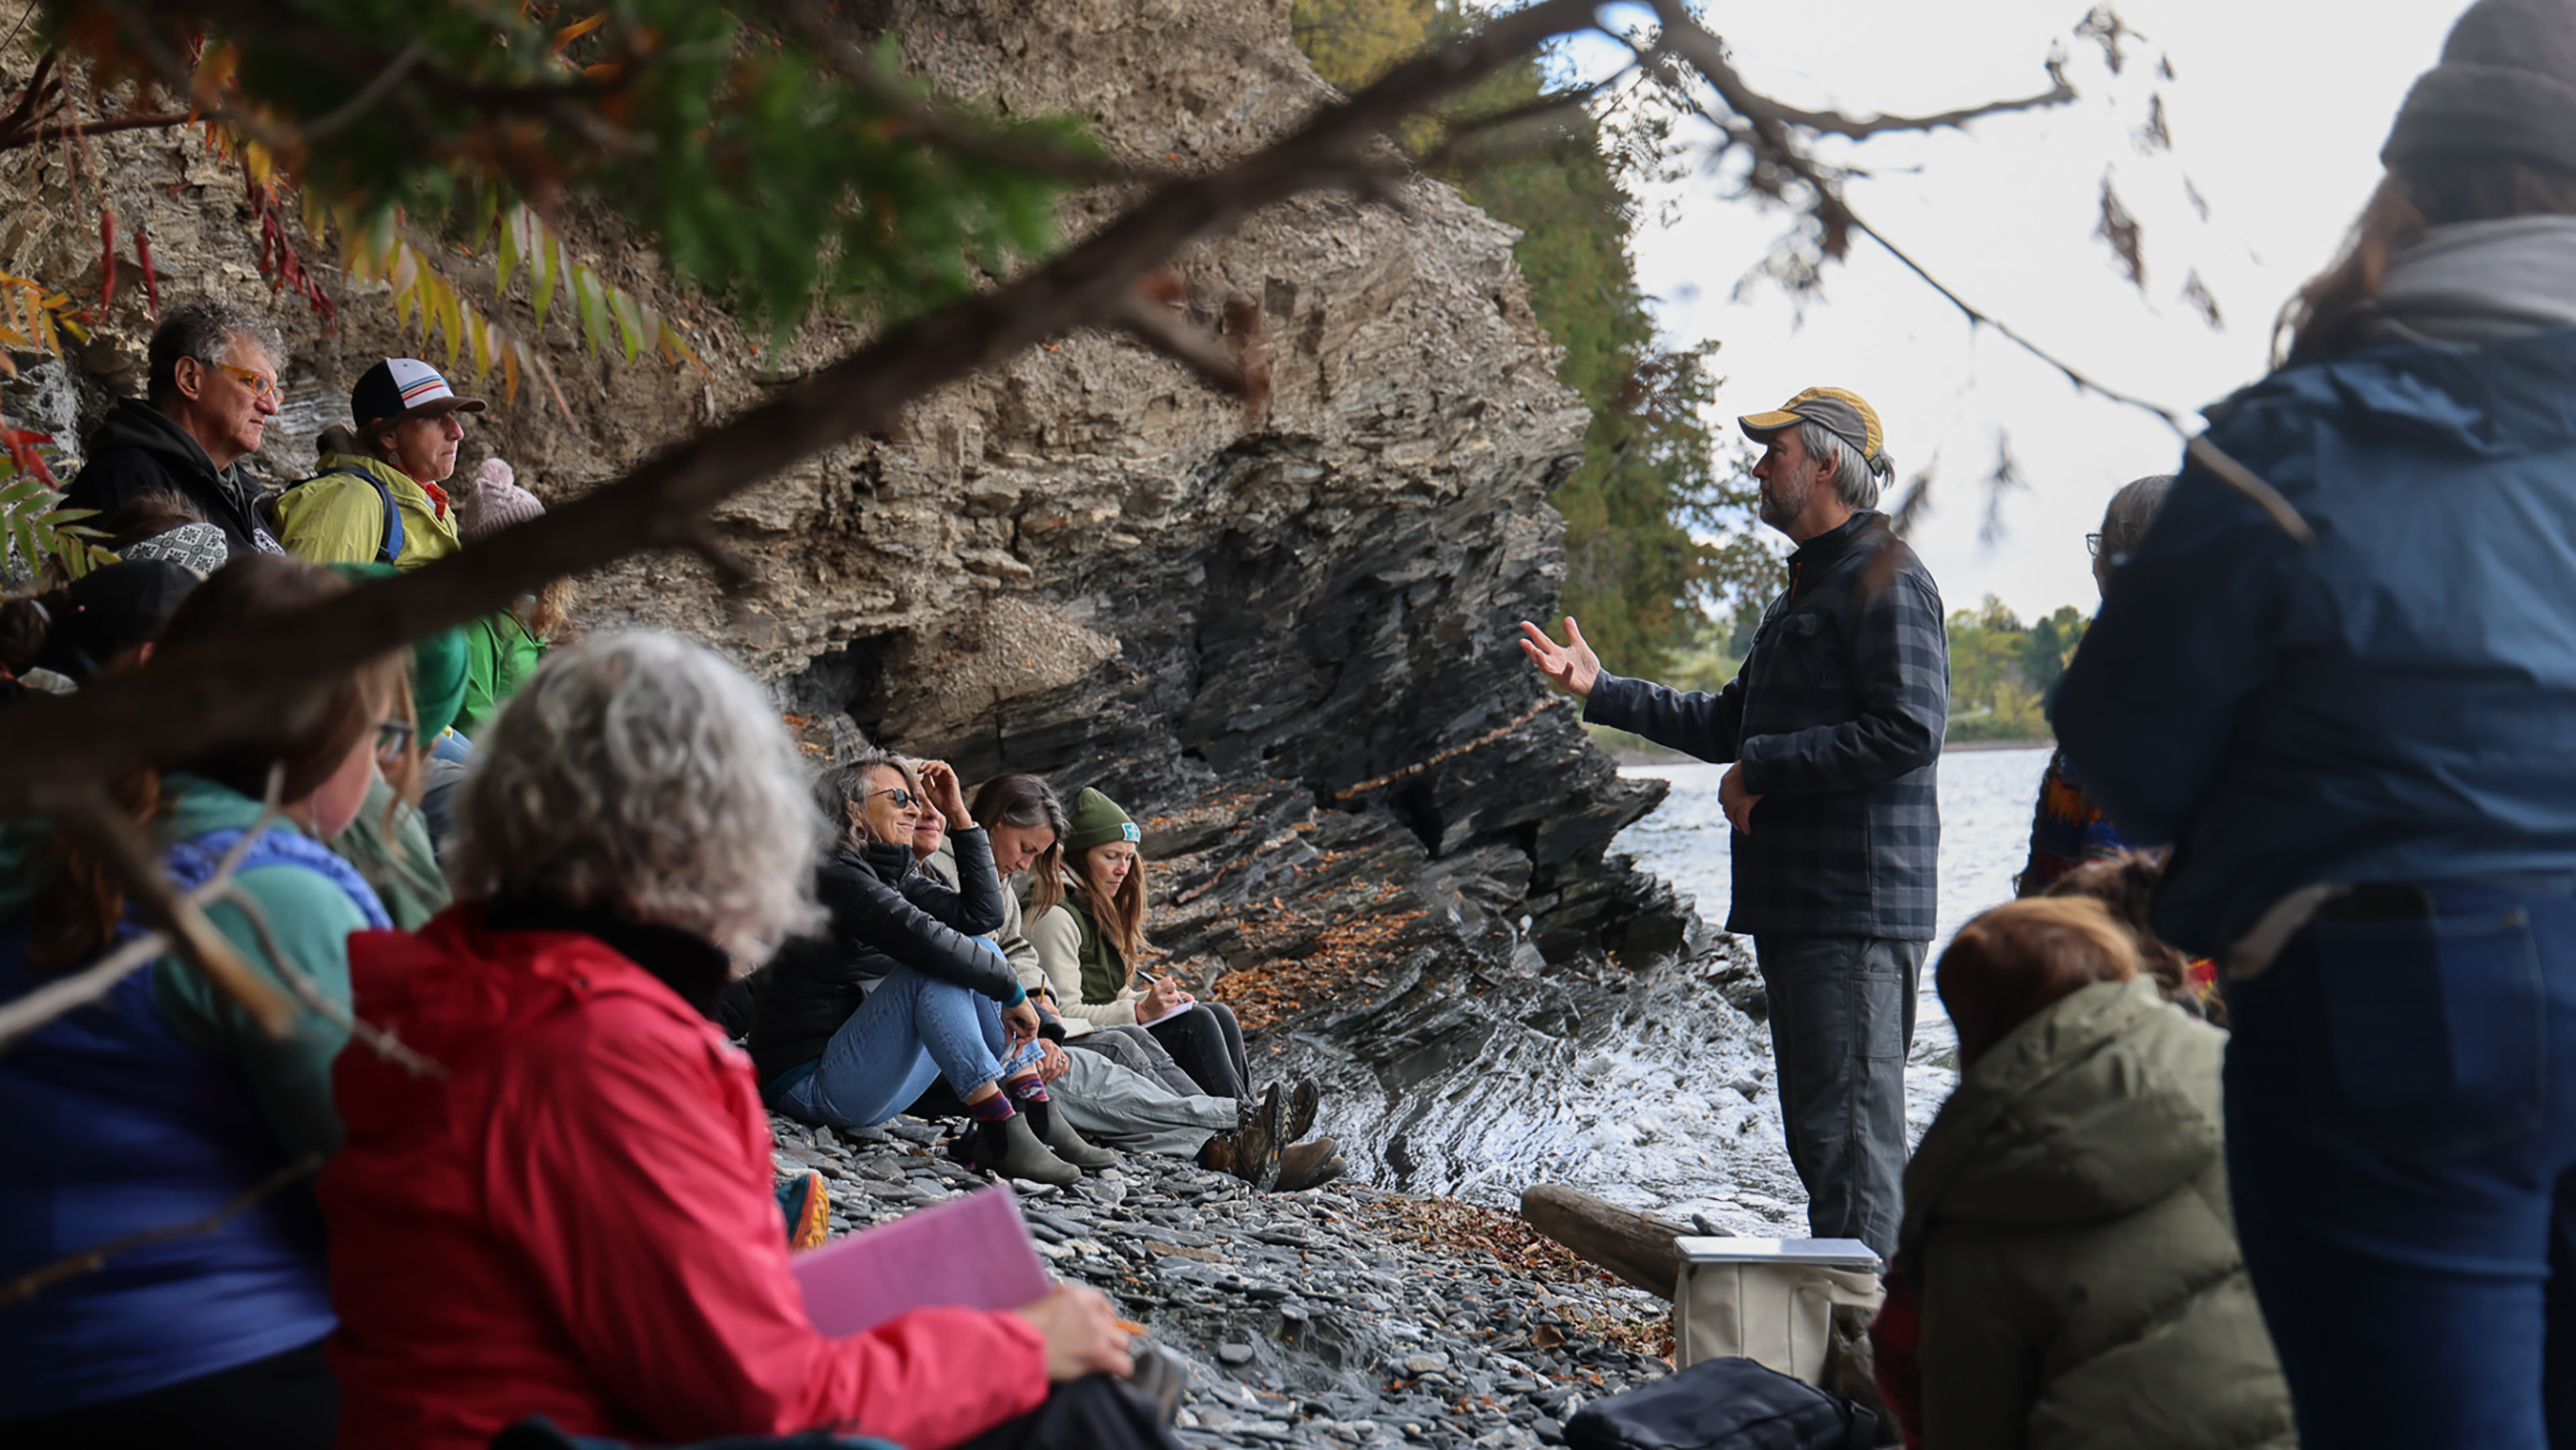 A dozen adults sit and stand along a rocky lake shoreline in fall, listening to an instructor